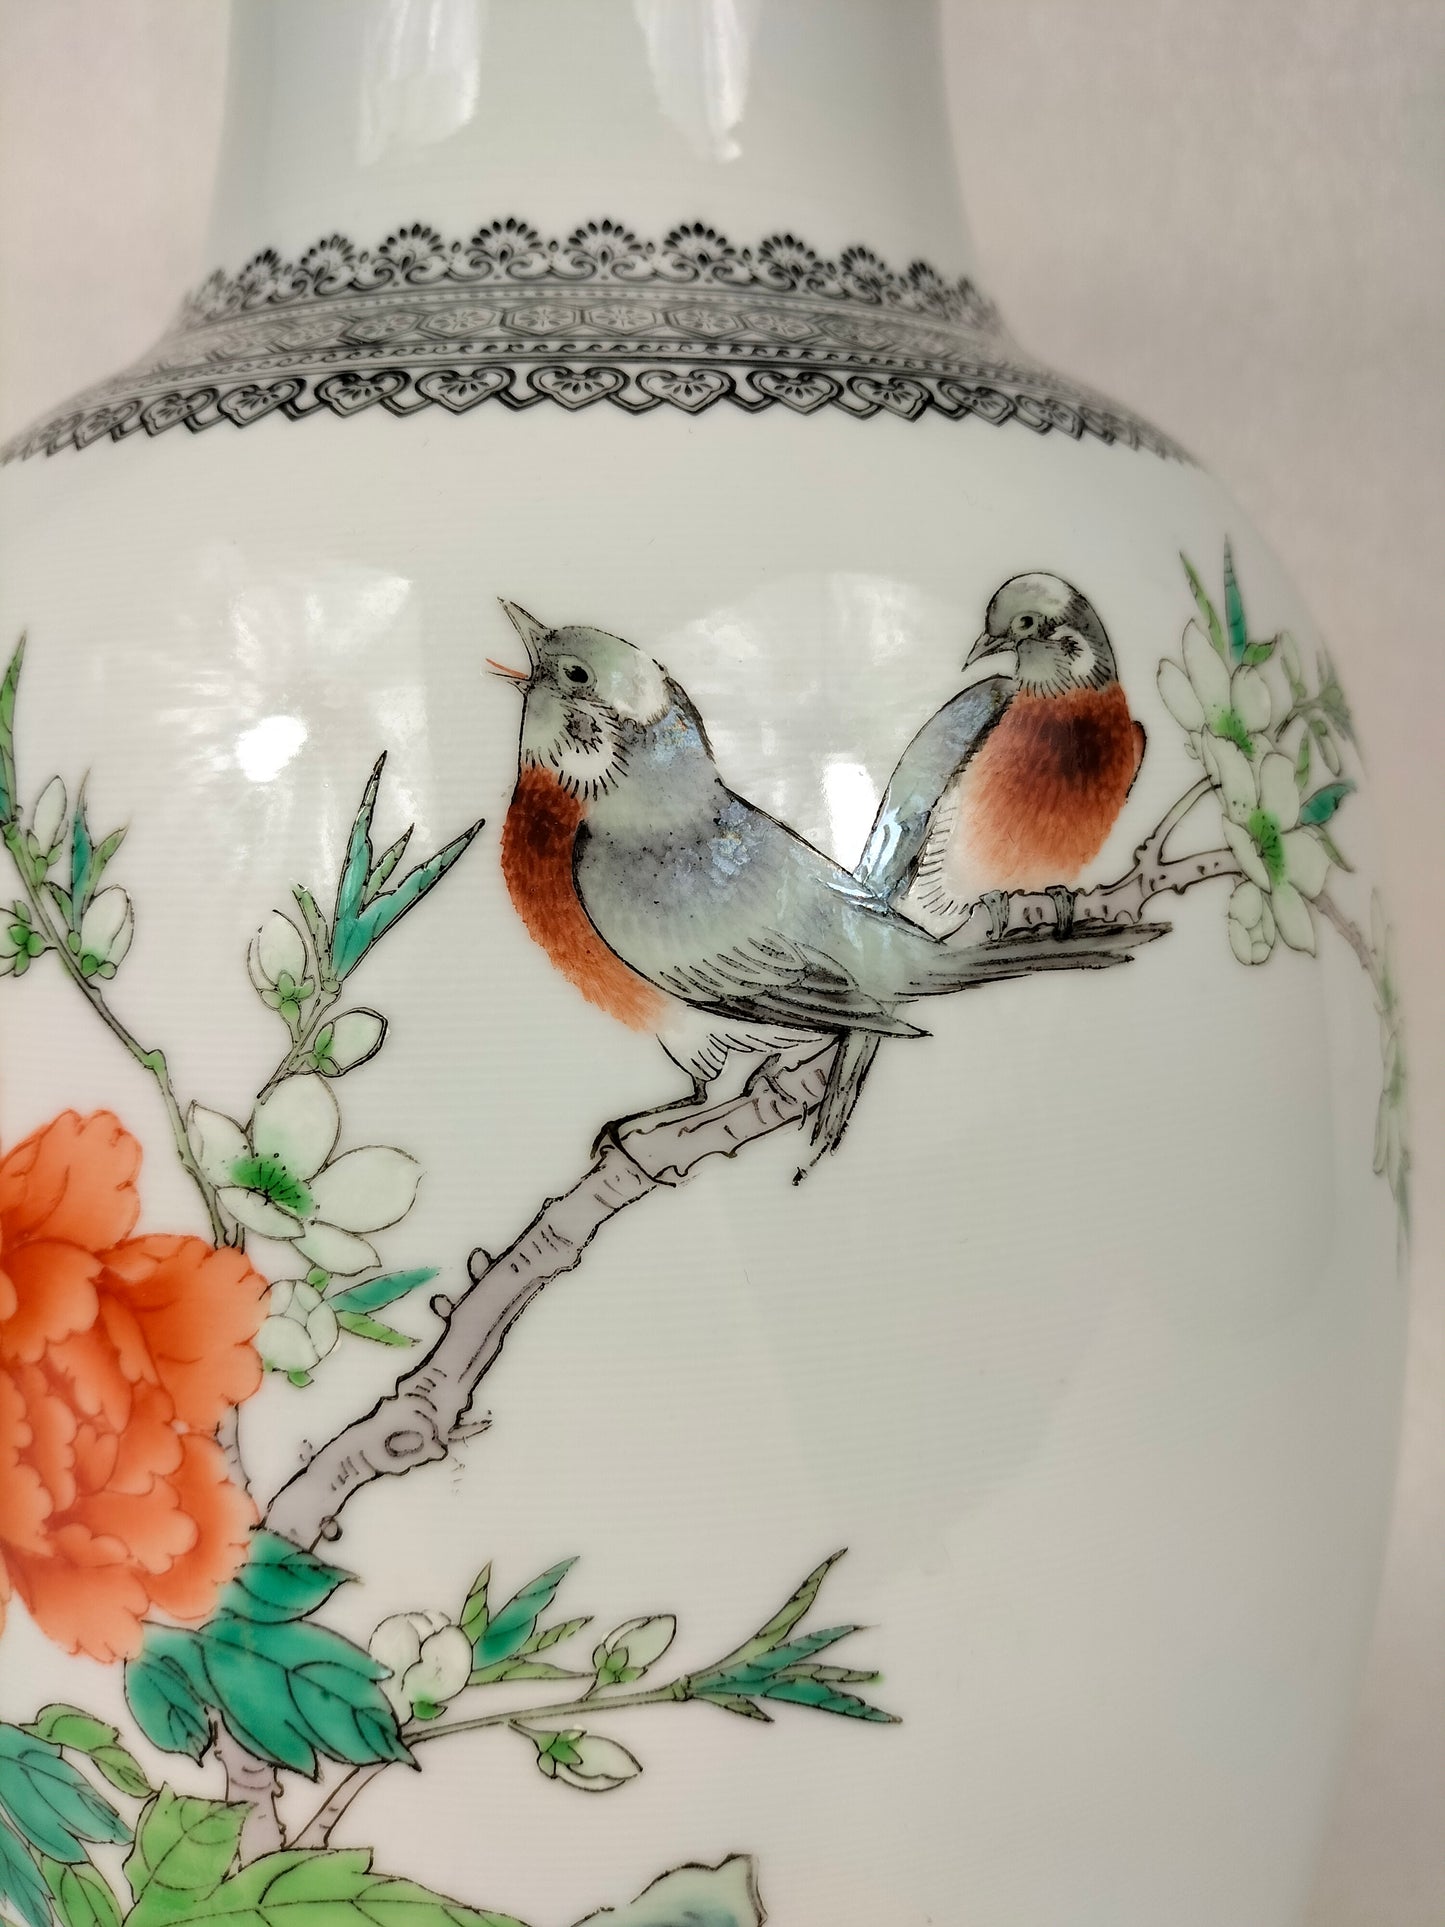 Chinese famille rose vase decorated with birds and flowers // Jingdezhen - Qianlong mark - 20th century